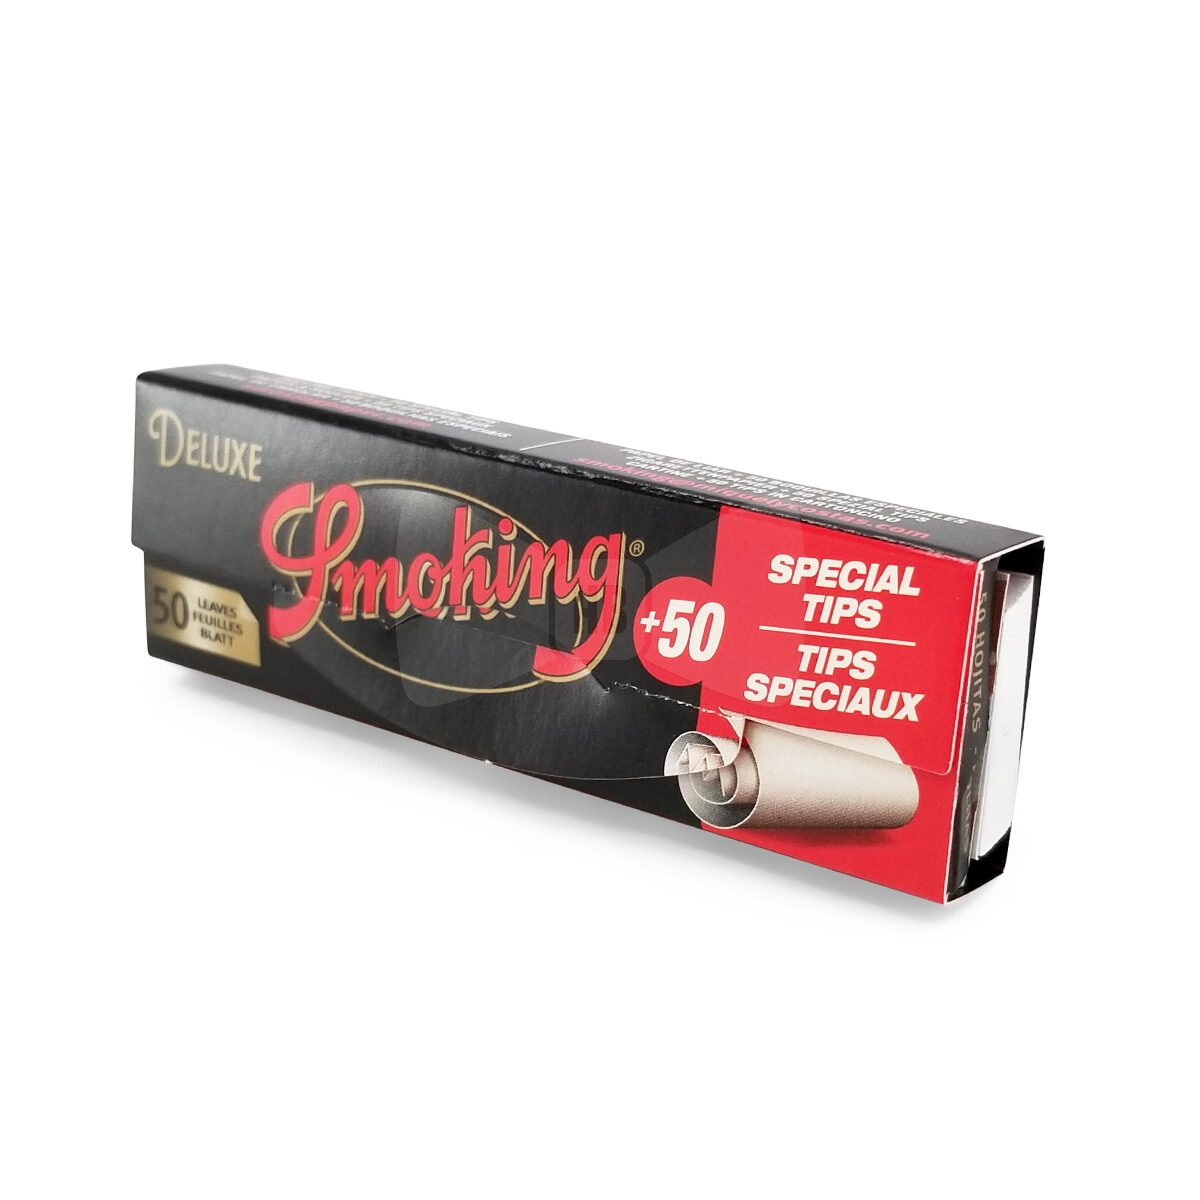 Smoking Brand Deluxe 1 1/4 with Tips Single Pack